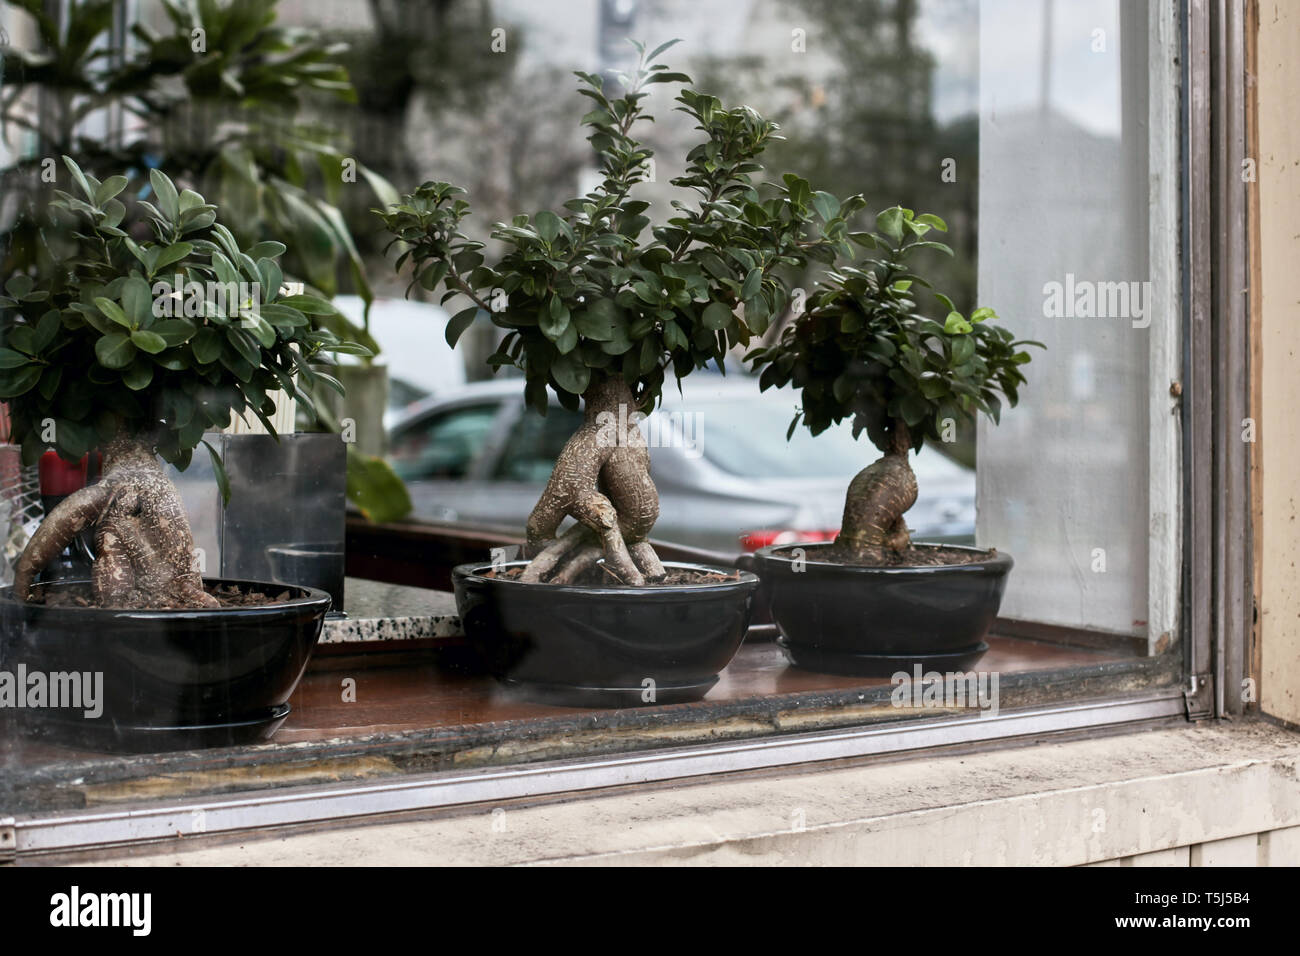 Ficus Ginseng Bonsai trees displaying on a window ledge in Montreal, Quebec Stock Photo